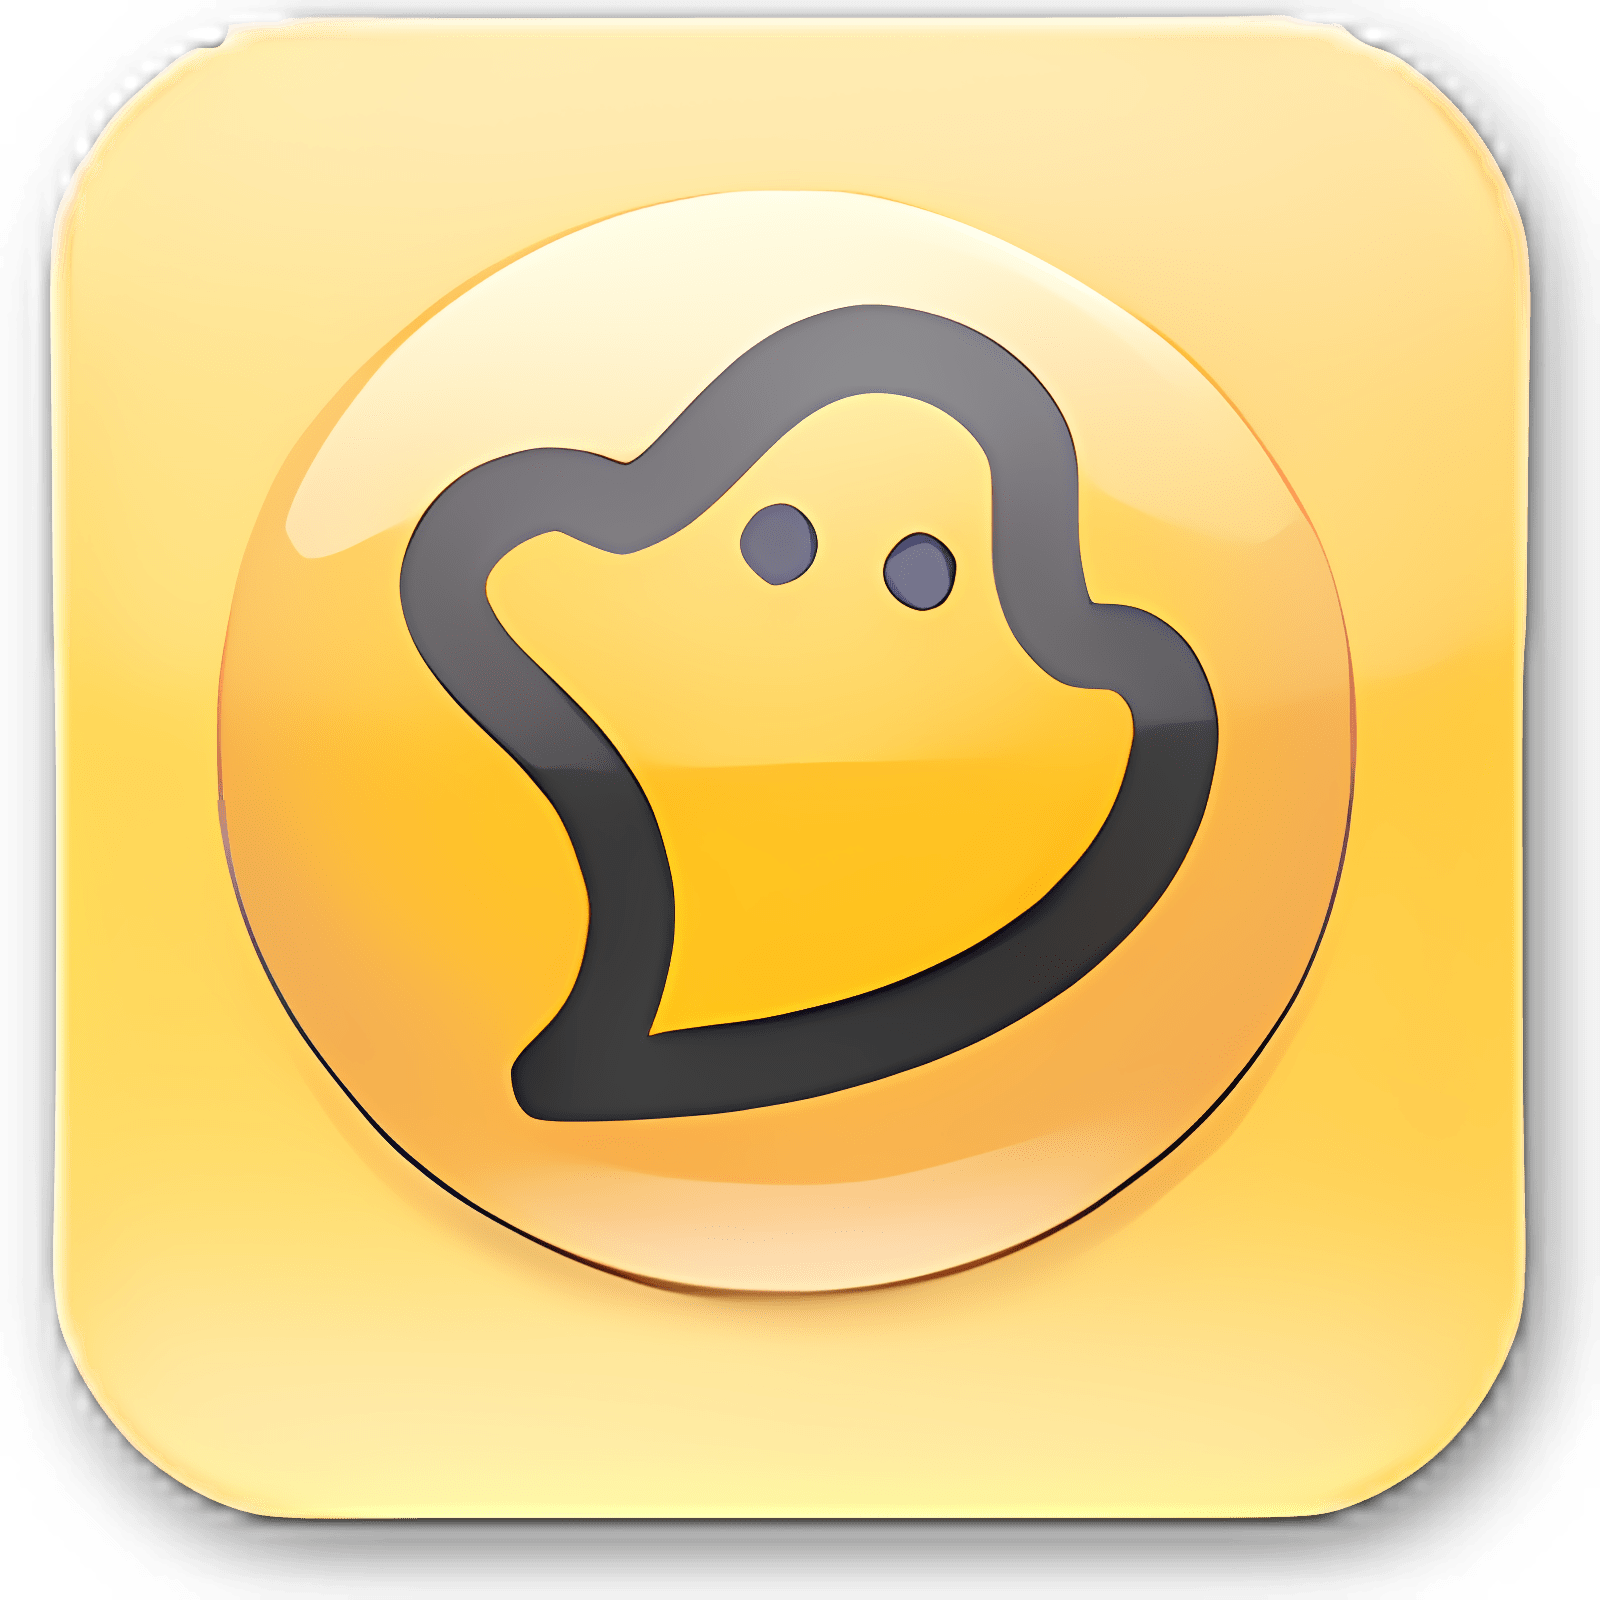 norton ghost download for windows 7